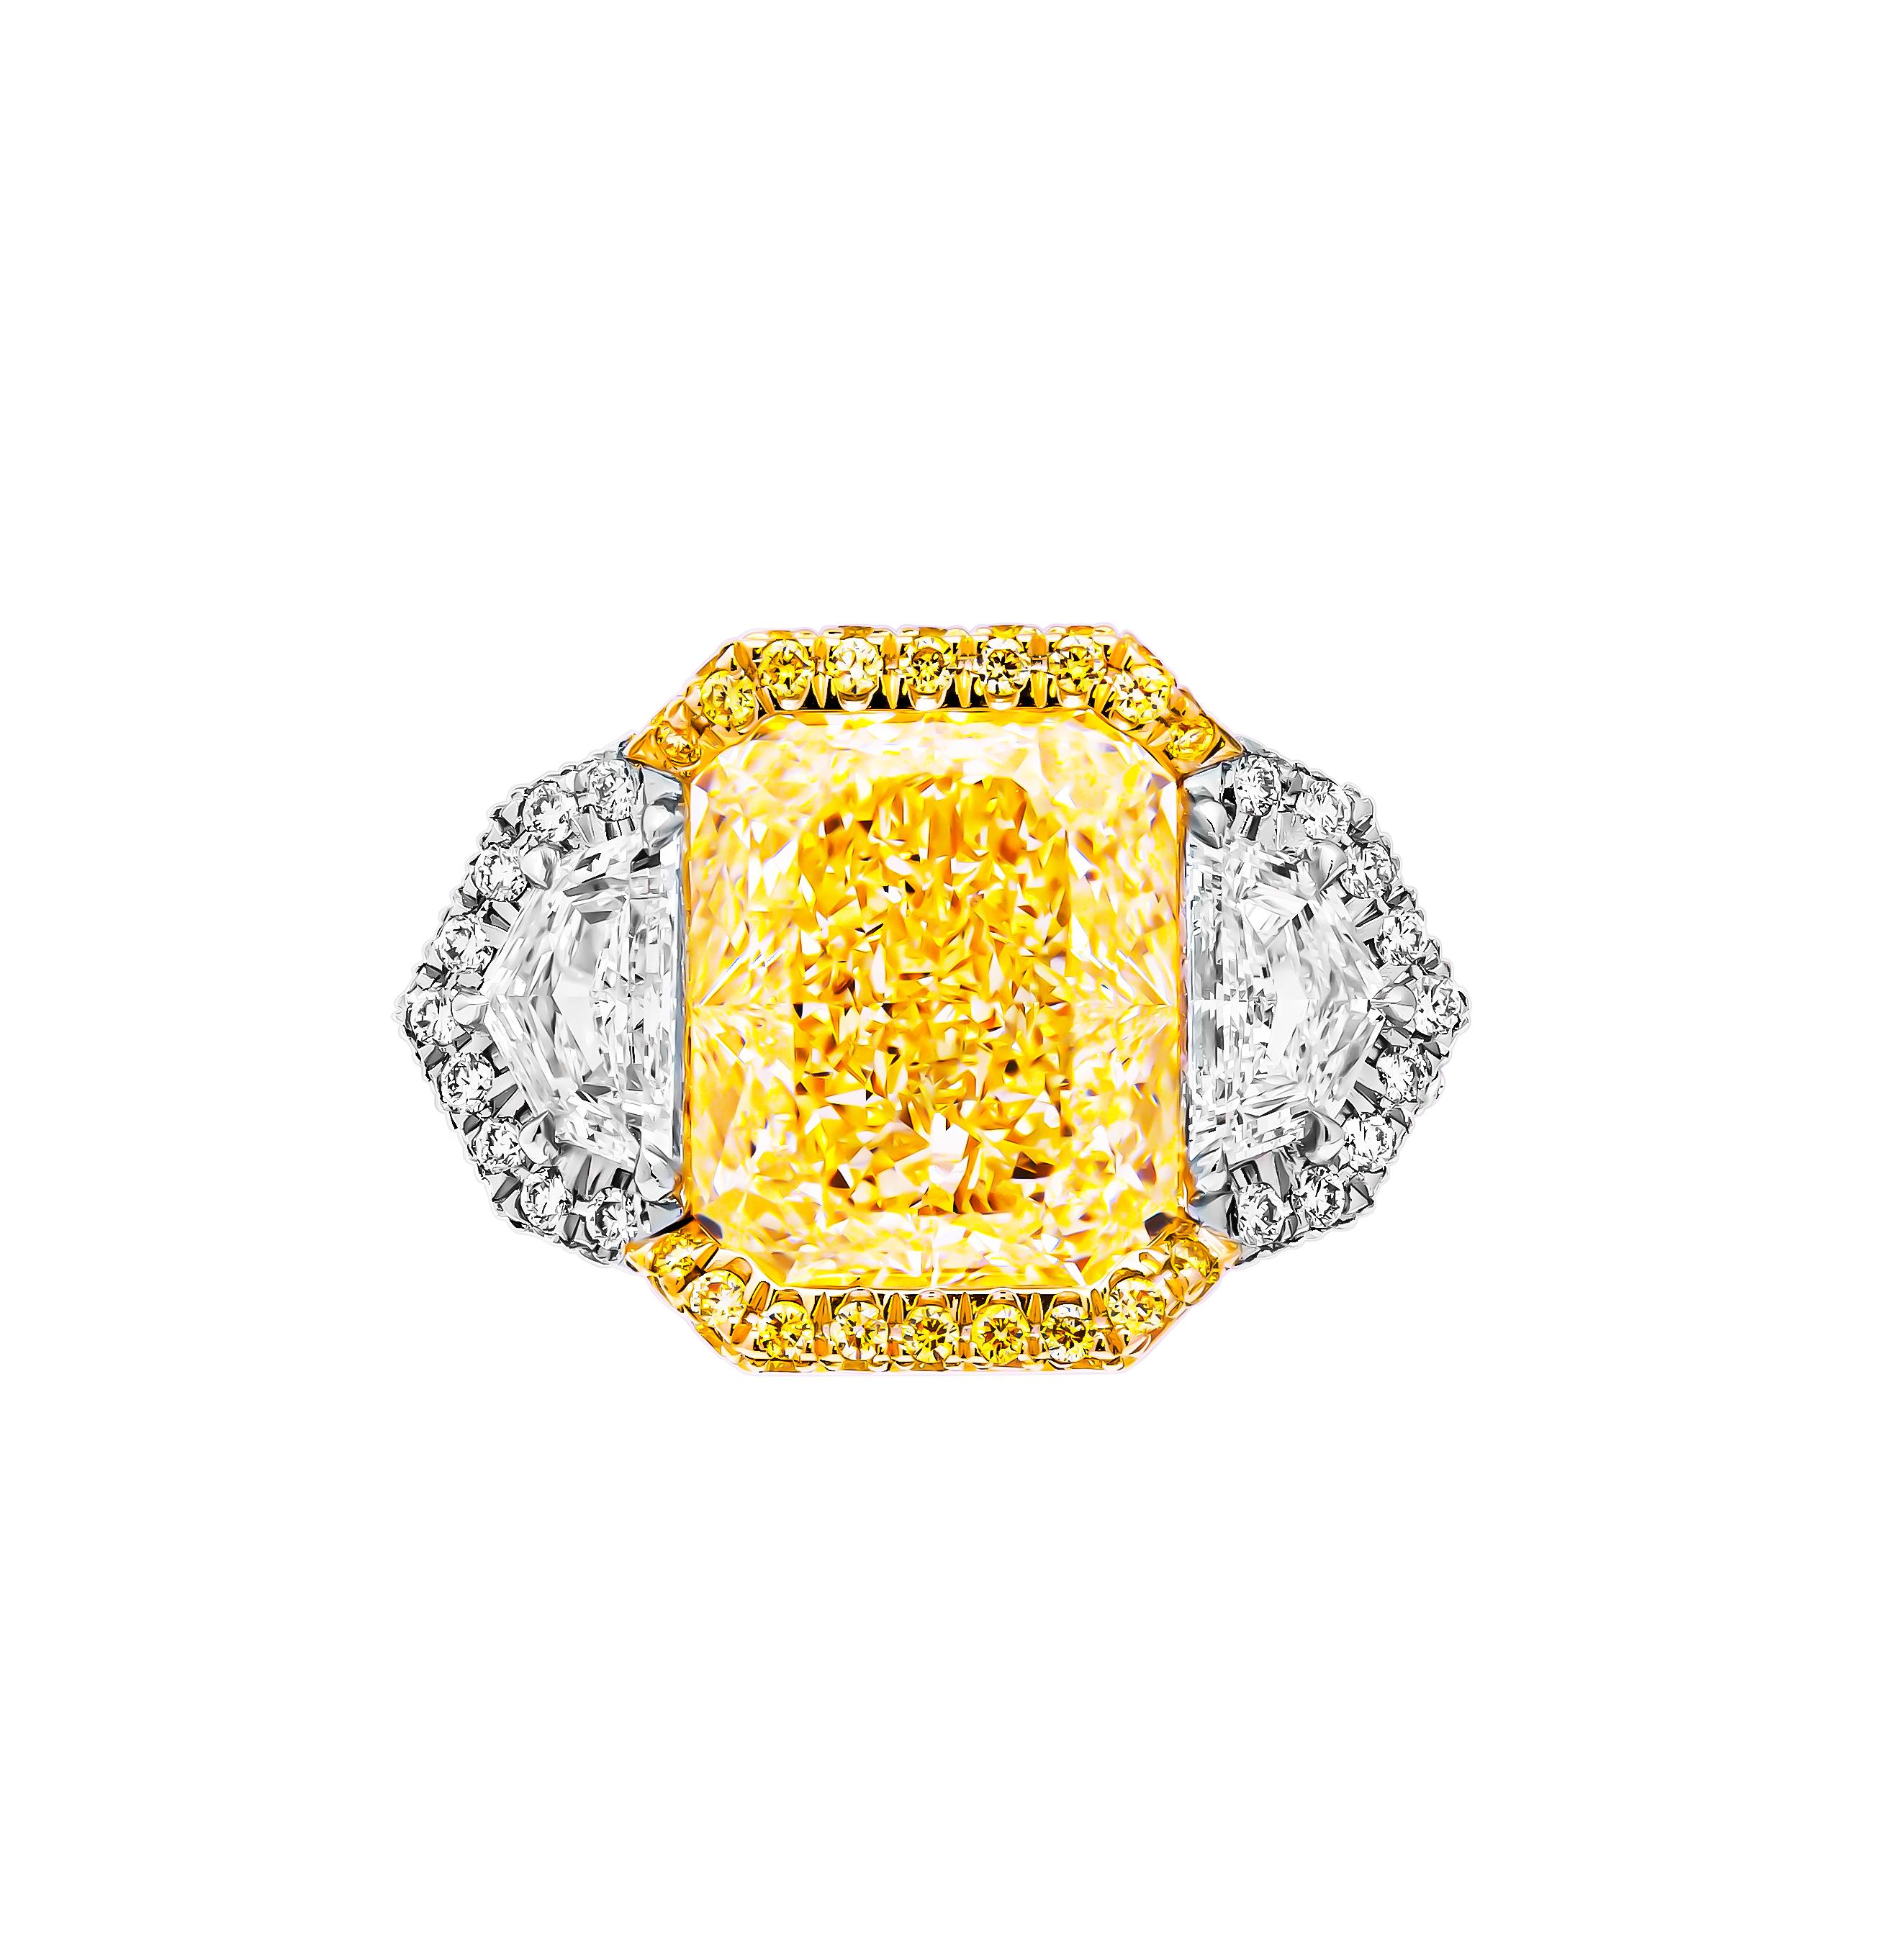 Indulge in the timeless elegance of this exquisite three-stone ring, crafted in a lustrous combination of 18K yellow gold and 950 platinum. At its heart lies a magnificent 7.06-carat natural fancy light yellow radiant diamond, ensconced in a sleek